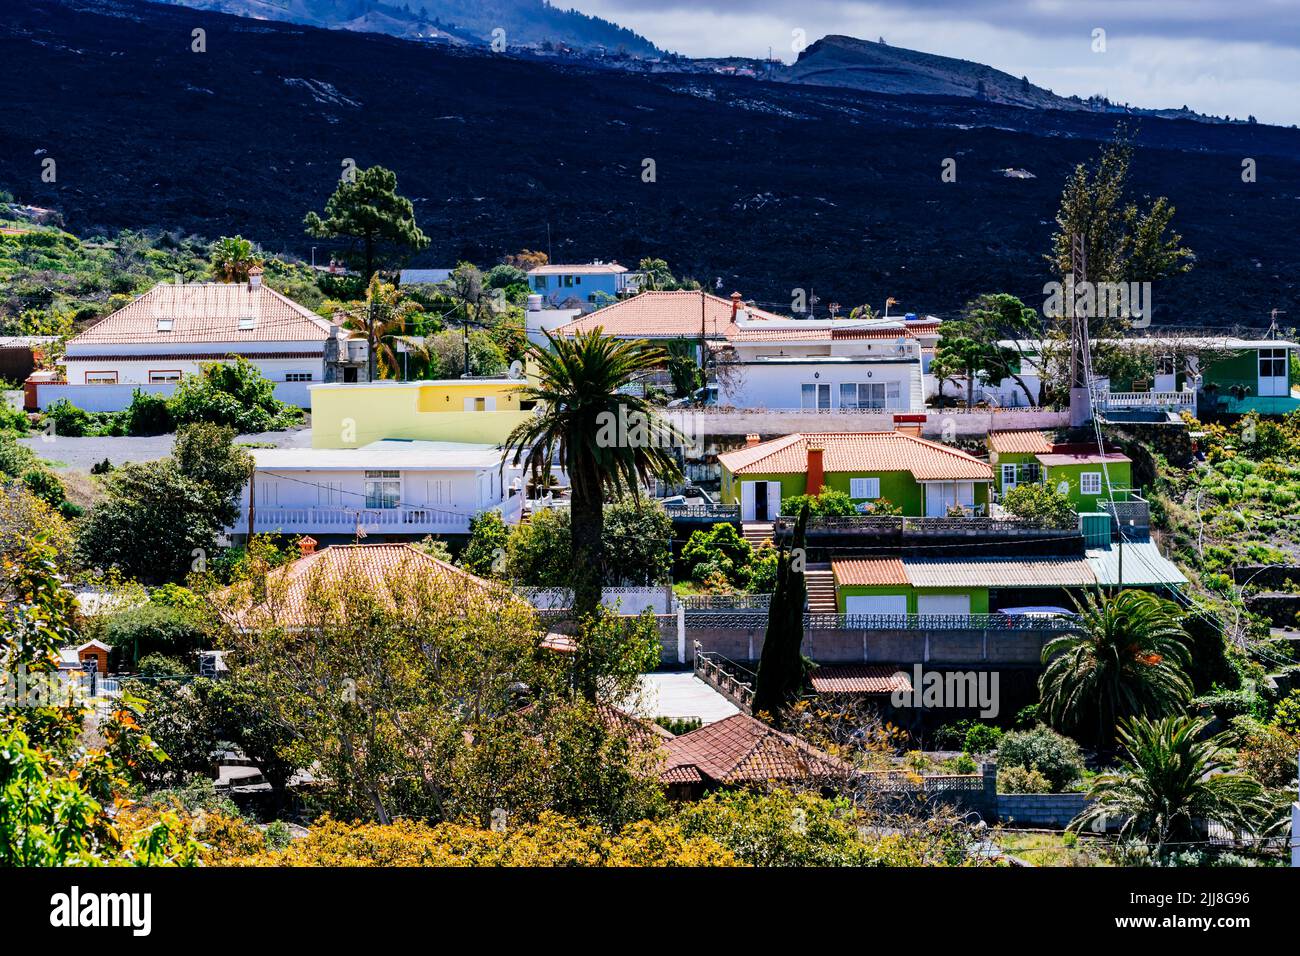 The river of solidified lava next to houses. Destruction caused by the lava river in the Aridane Valley. La Palma, Canary Islands, Spain Stock Photo